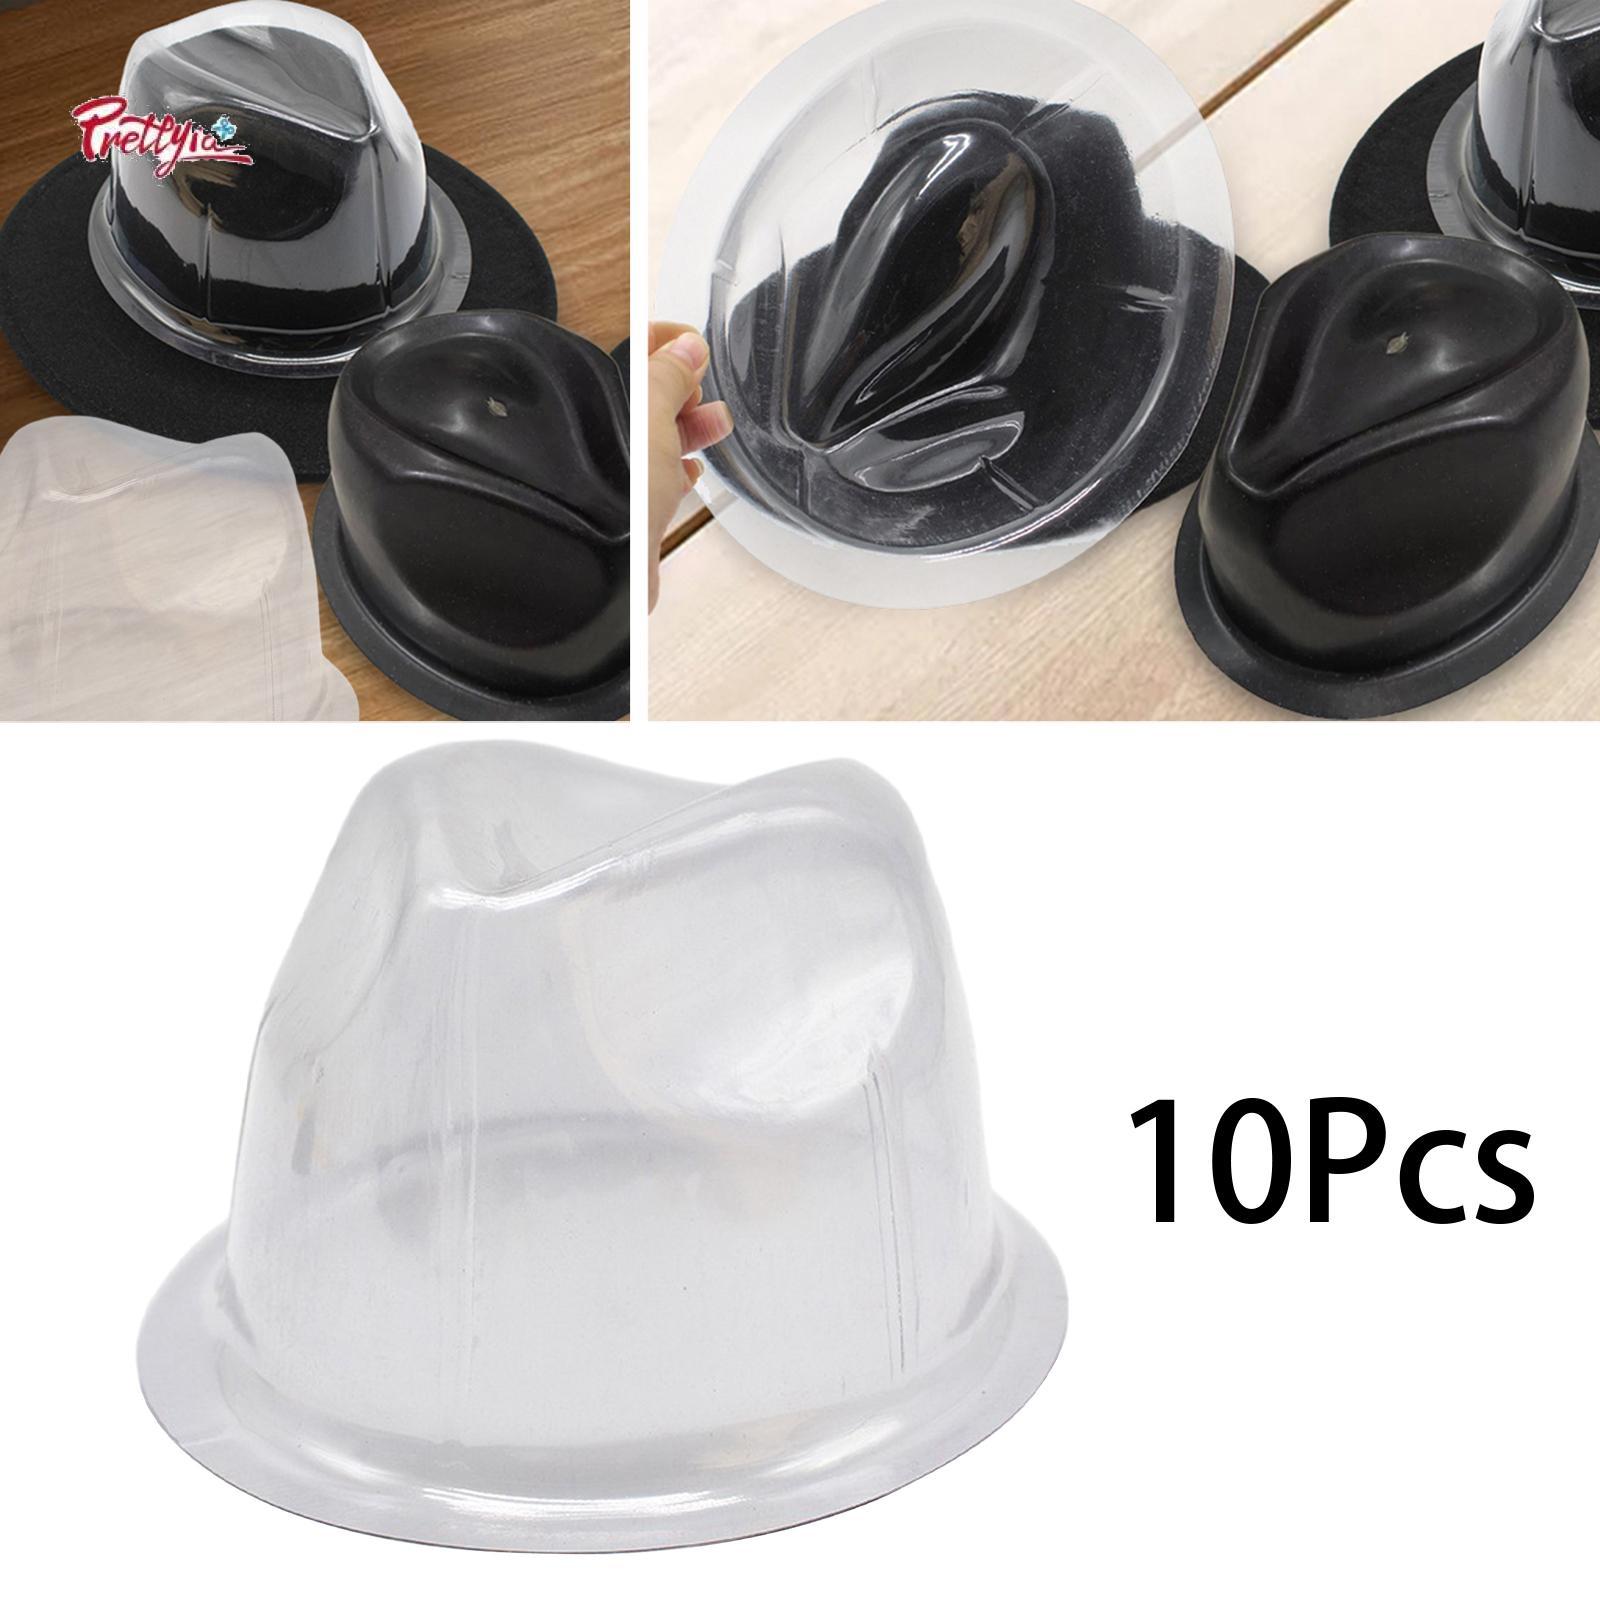 10Pcs Jazz Hat Stand Hat Support Holders Supplies Travel Caps Display